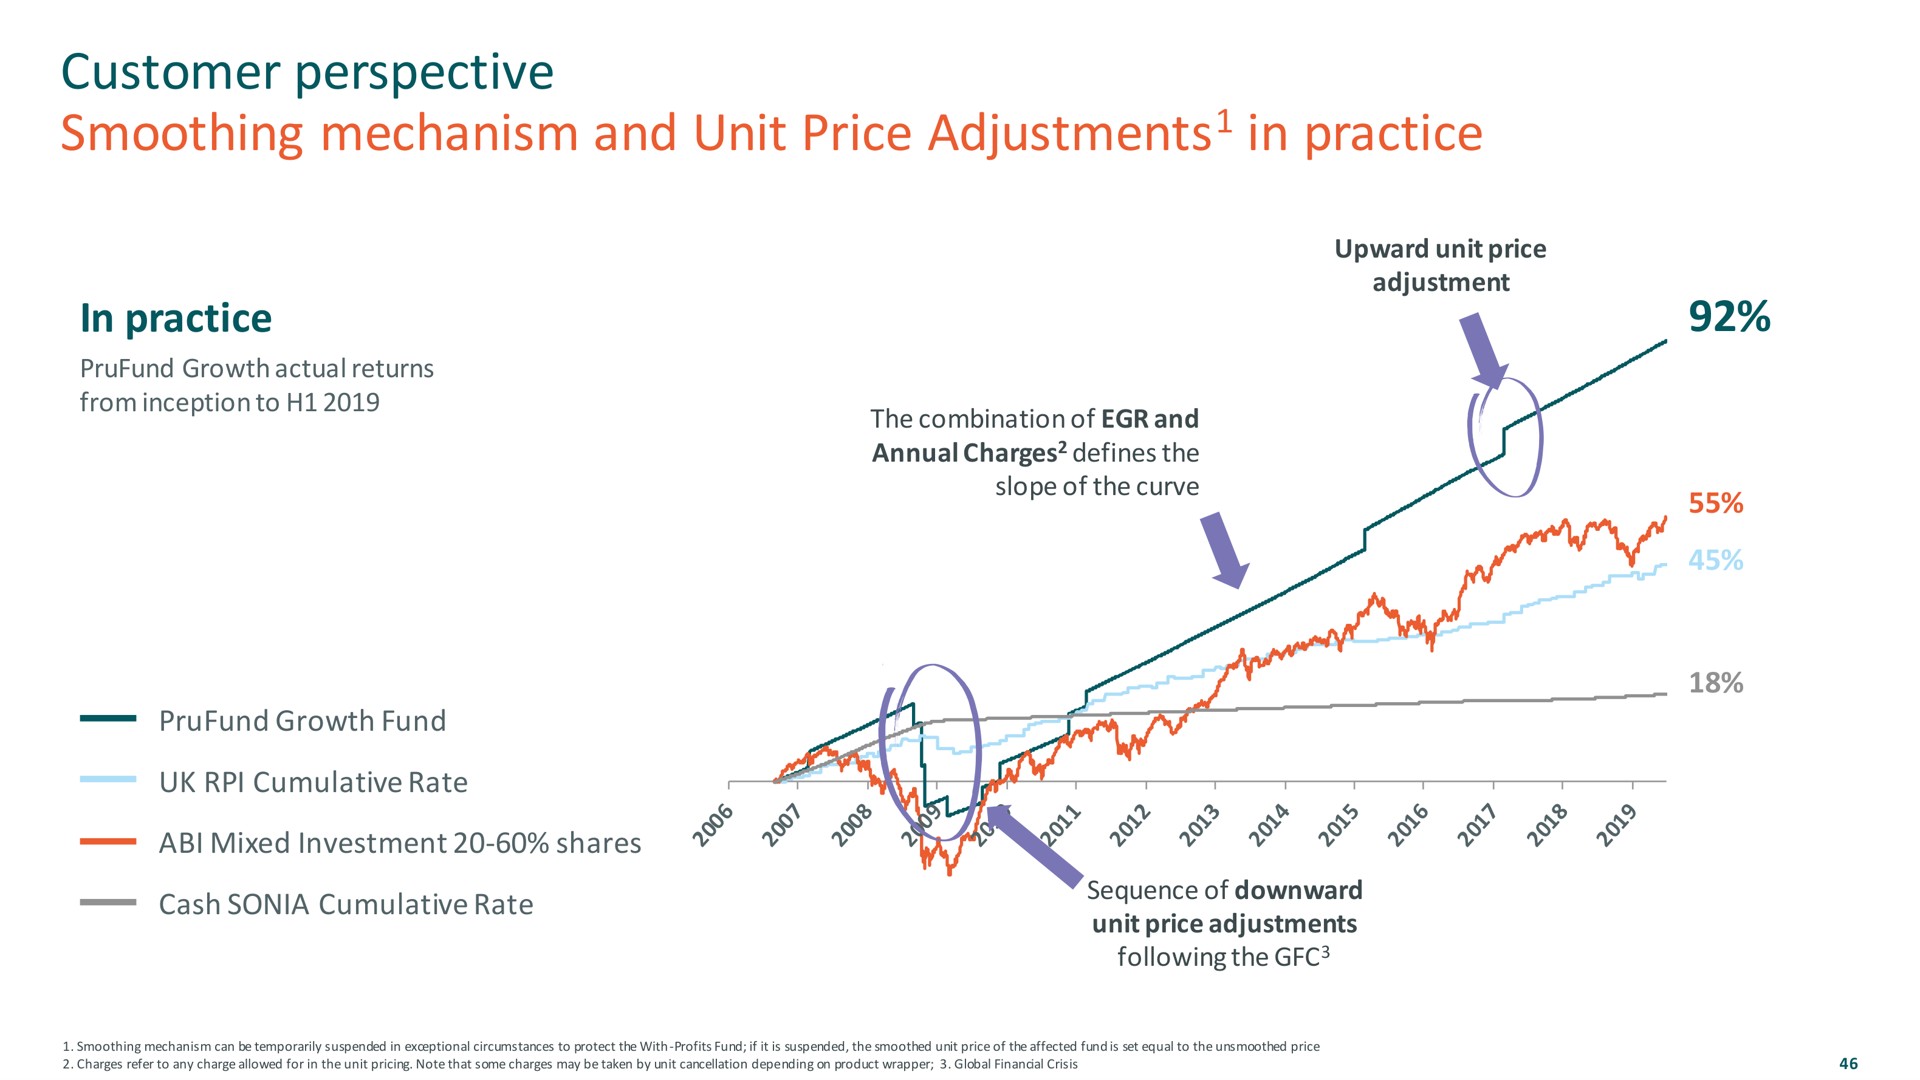 customer perspective smoothing mechanism and unit price adjustments in practice adjustments | M&G